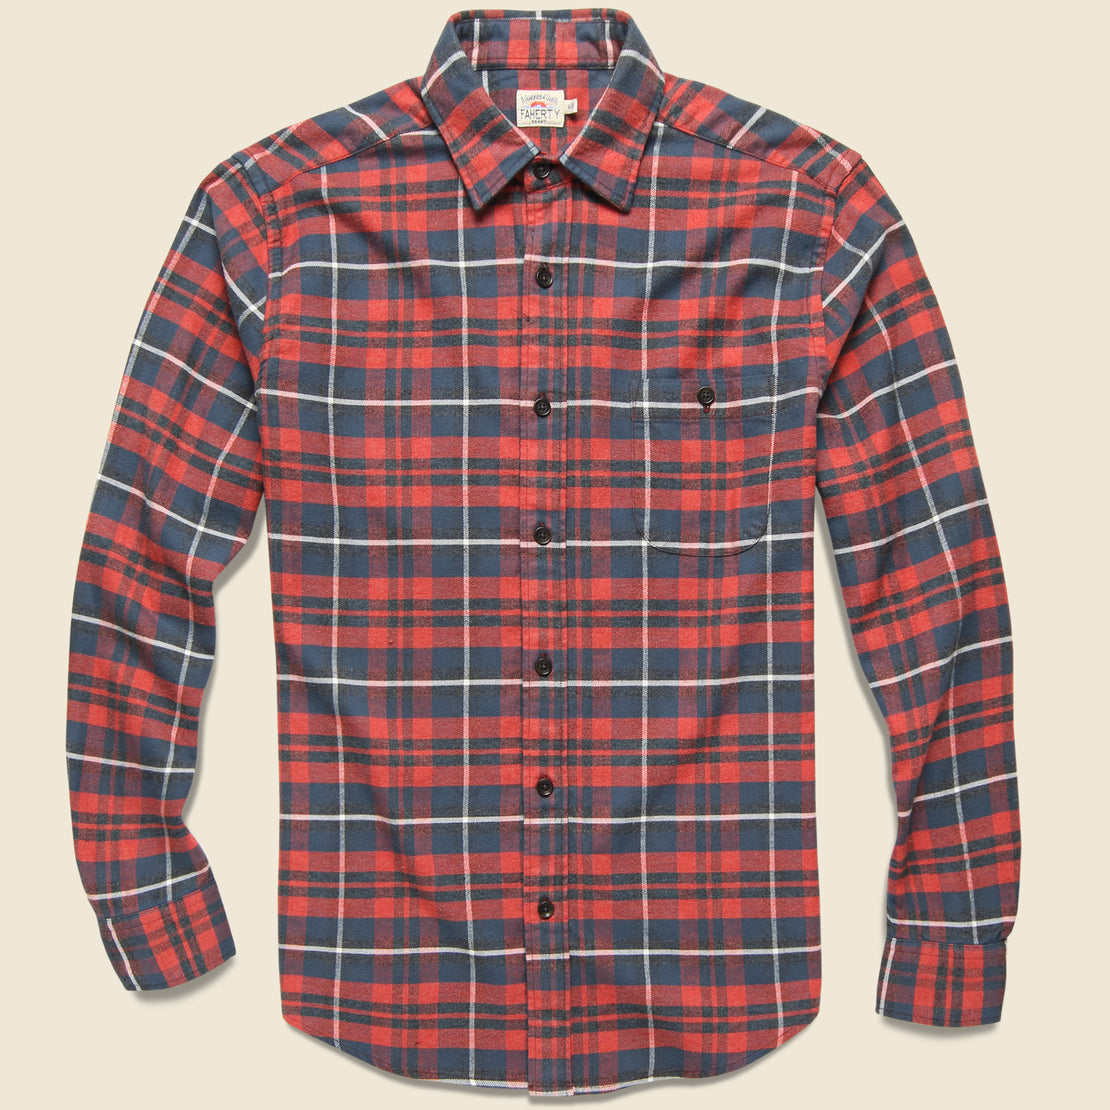 Faherty Stretch Seaview Shirt - Red/Charcoal/Grey